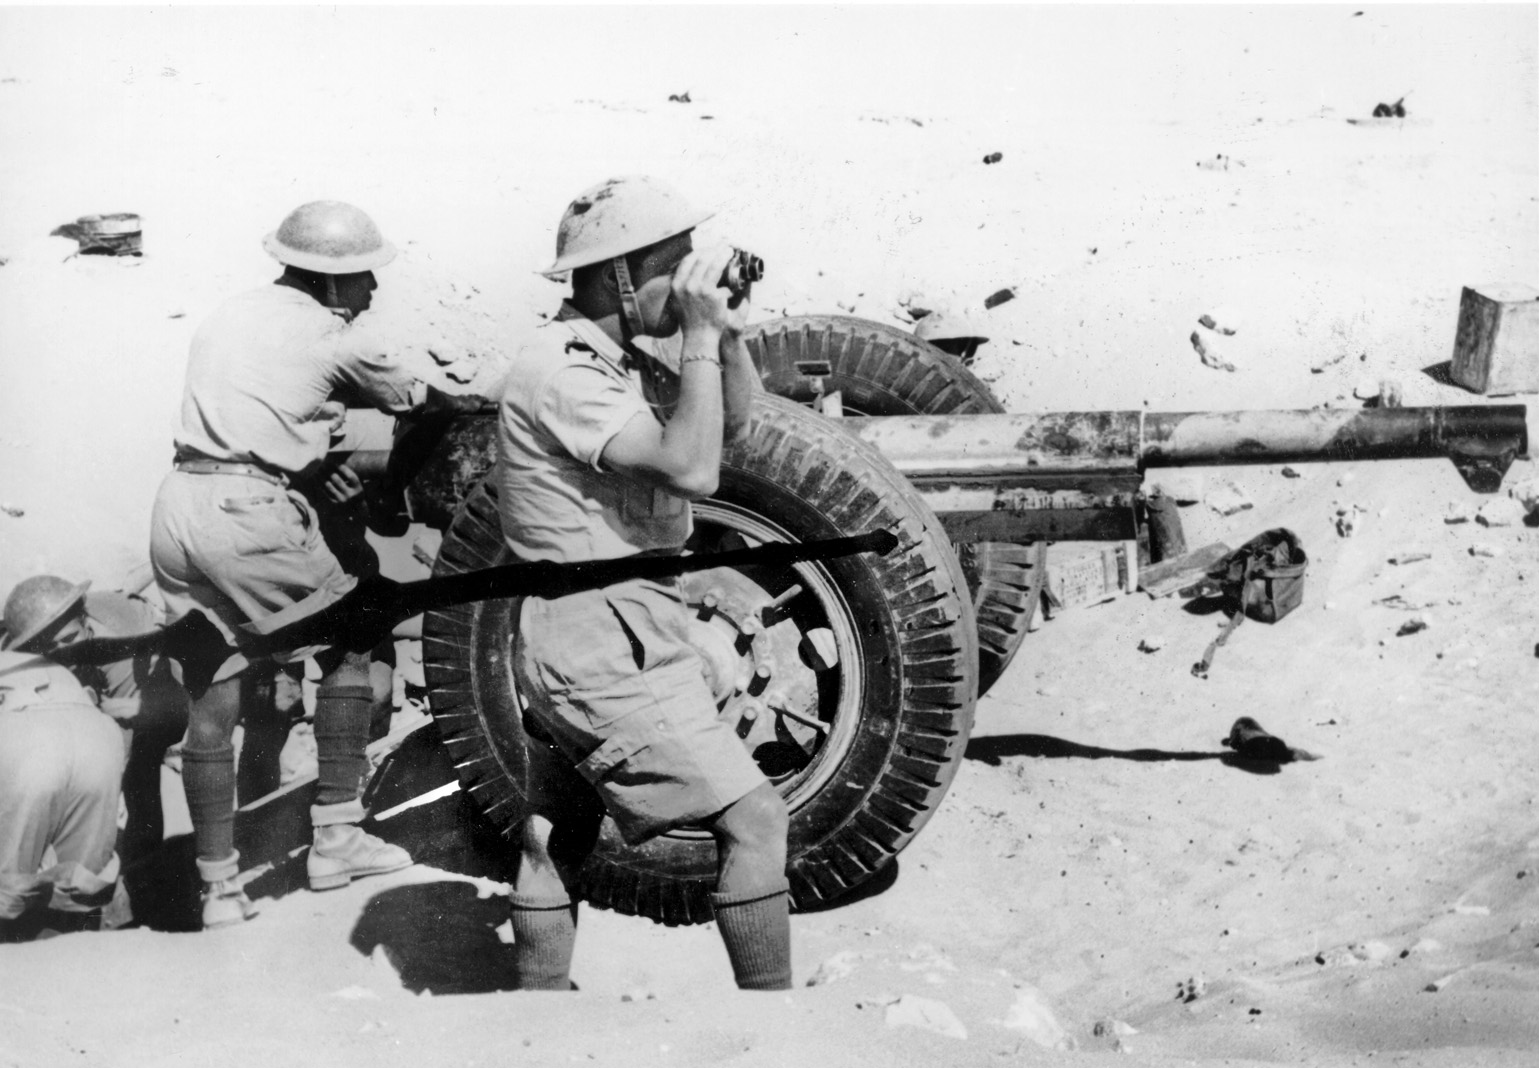 The crew of a Free French anti-tank gun prepares for action in the desert. The Free French garrison of the defensive position at Bir Hacheim proved a tough nut for the Germans to crack during their June 1942 offensive. 